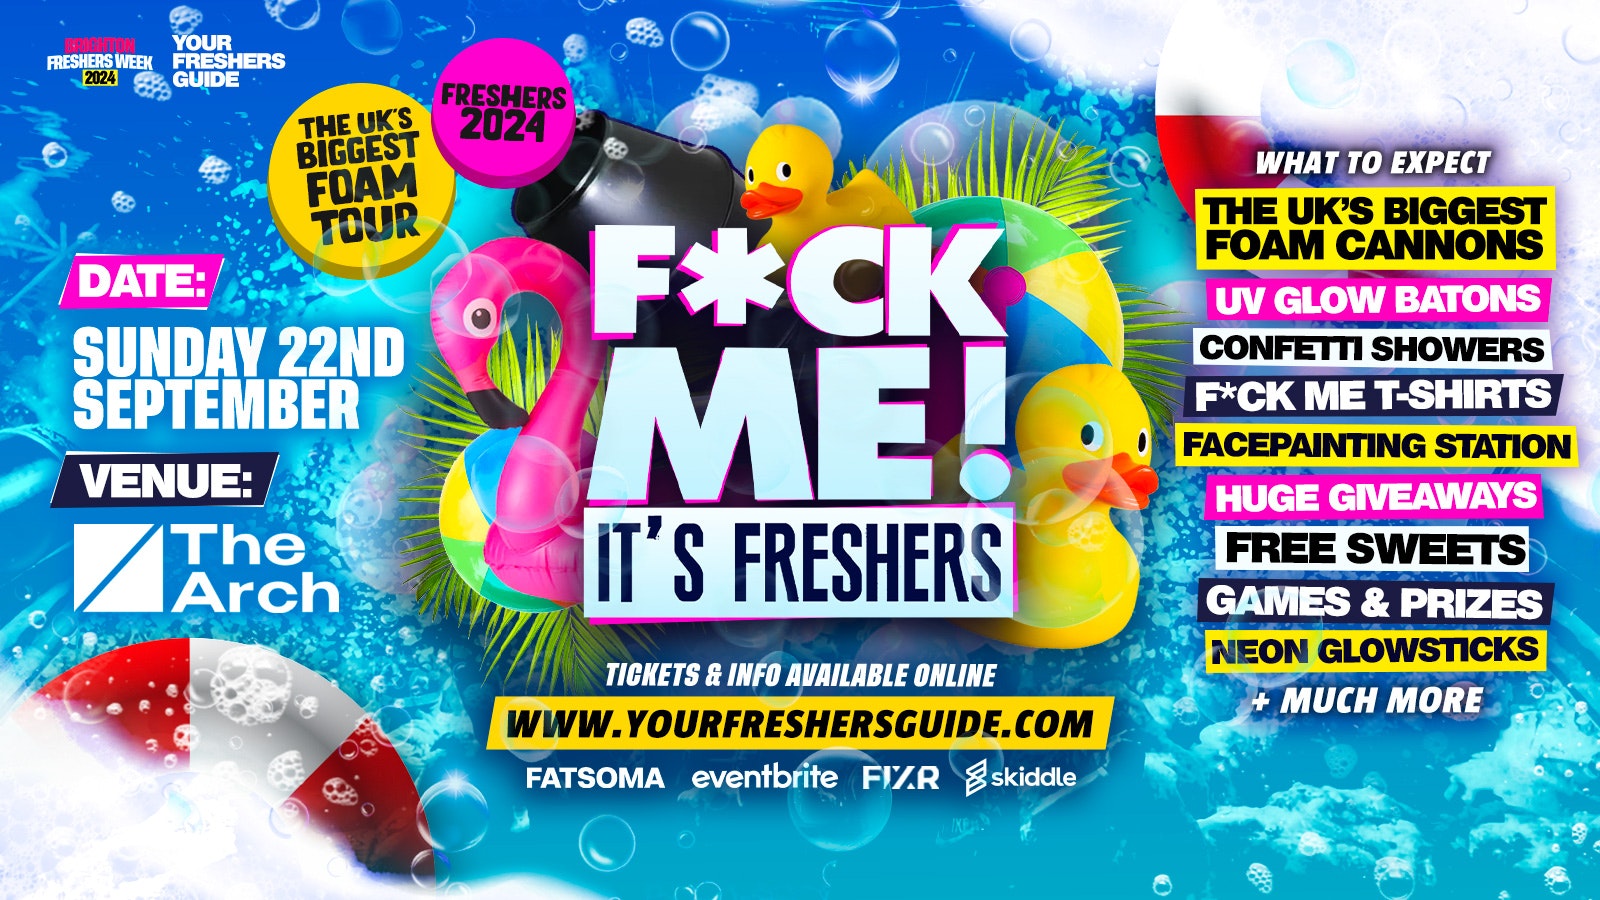 F*CK ME It’s Freshers Foam Party | Brighton Freshers 2024 – FREE Queue Jump With Every Ticket 💃 – TODAY ONLY!